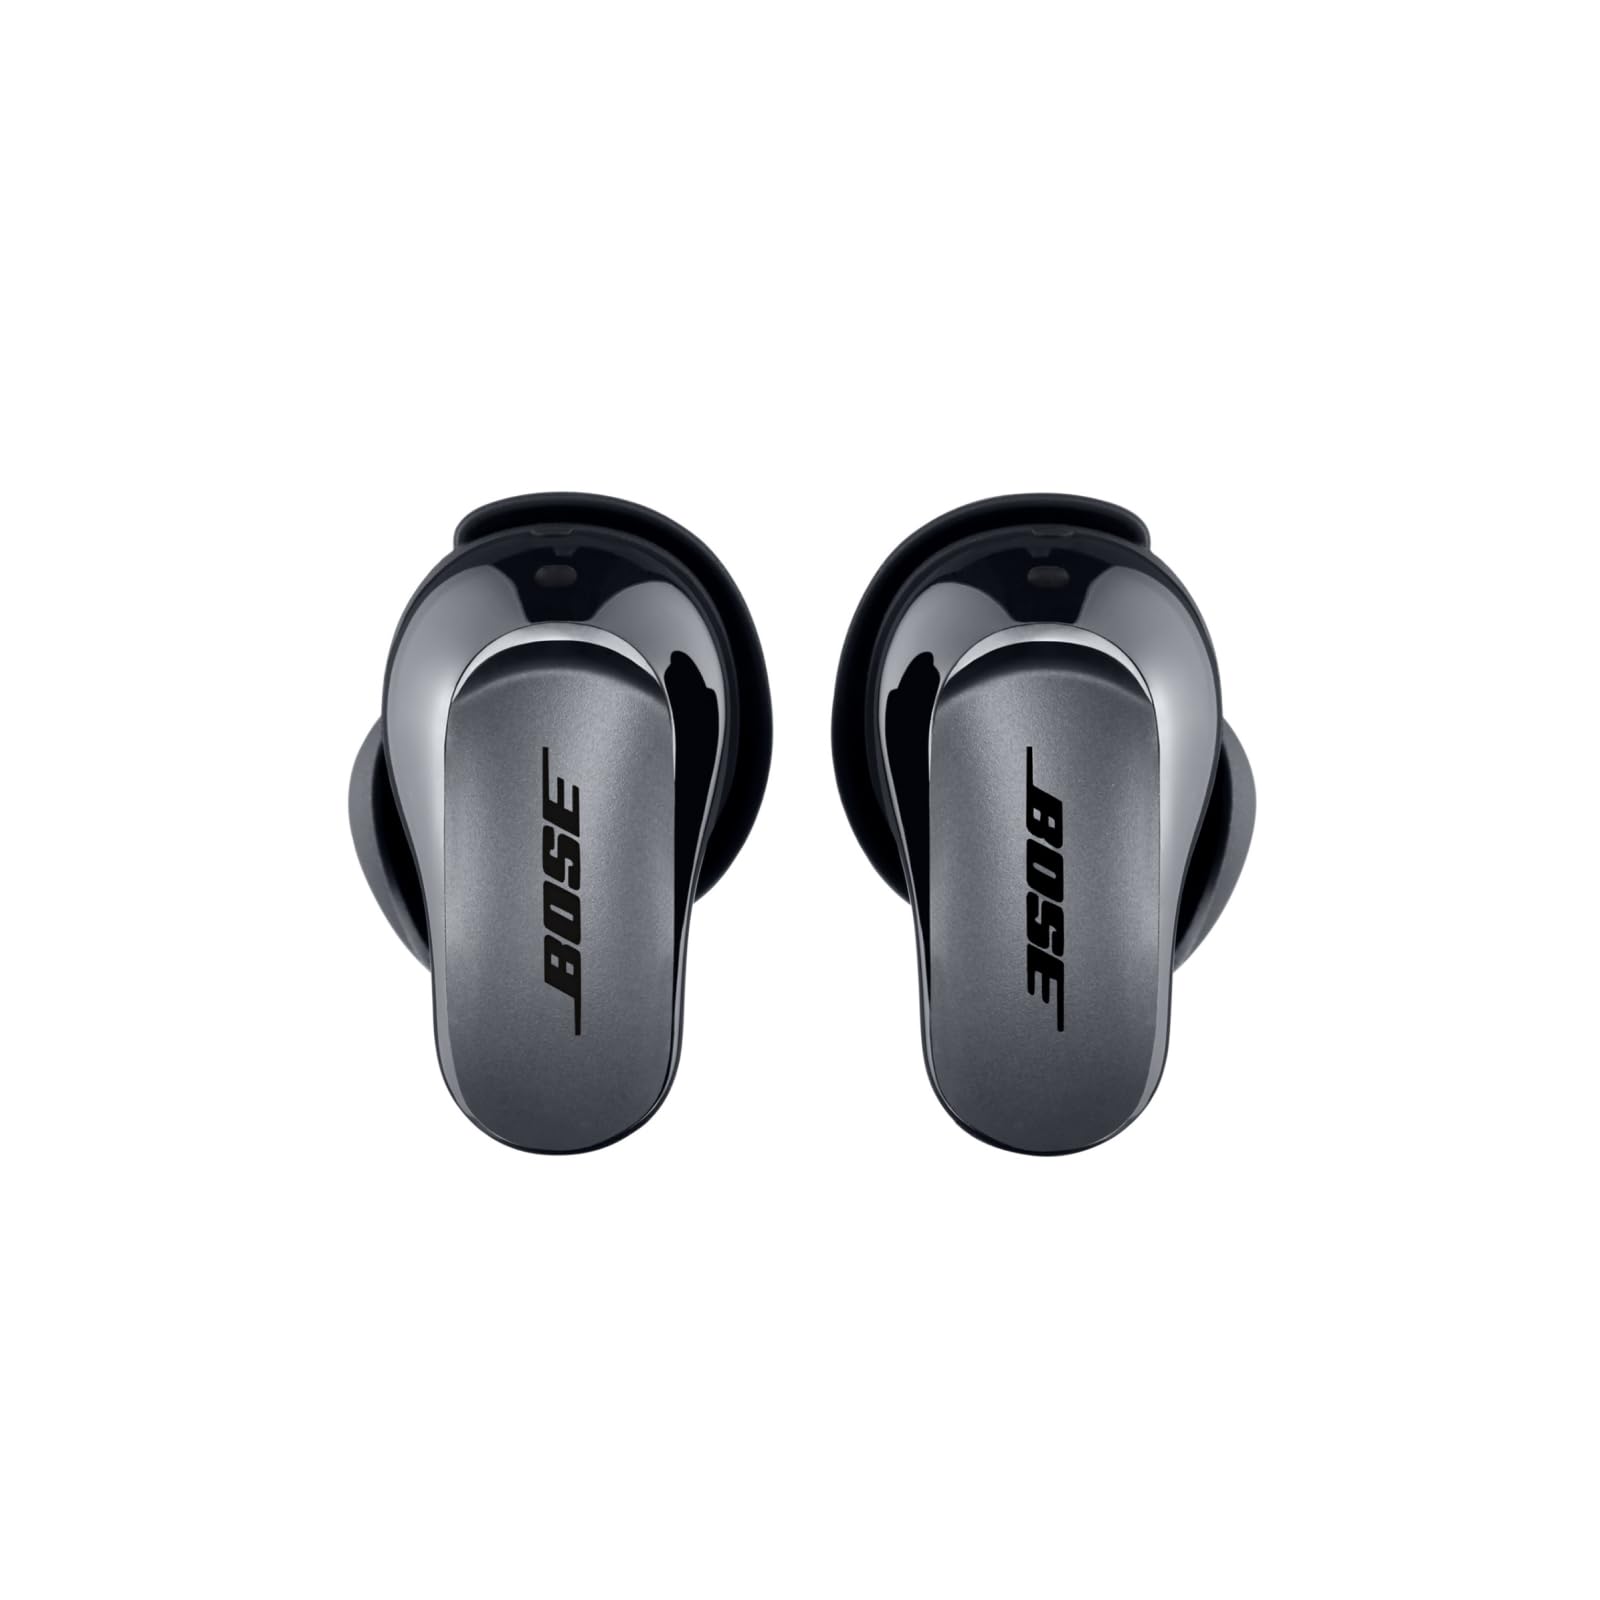 New Bose QuietComfort Ultra Wireless Noise Cancelling Earbuds, Bluetooth Noise Cancelling Earbuds with Spatial Audio and World-Class Noise Cancellation, Black